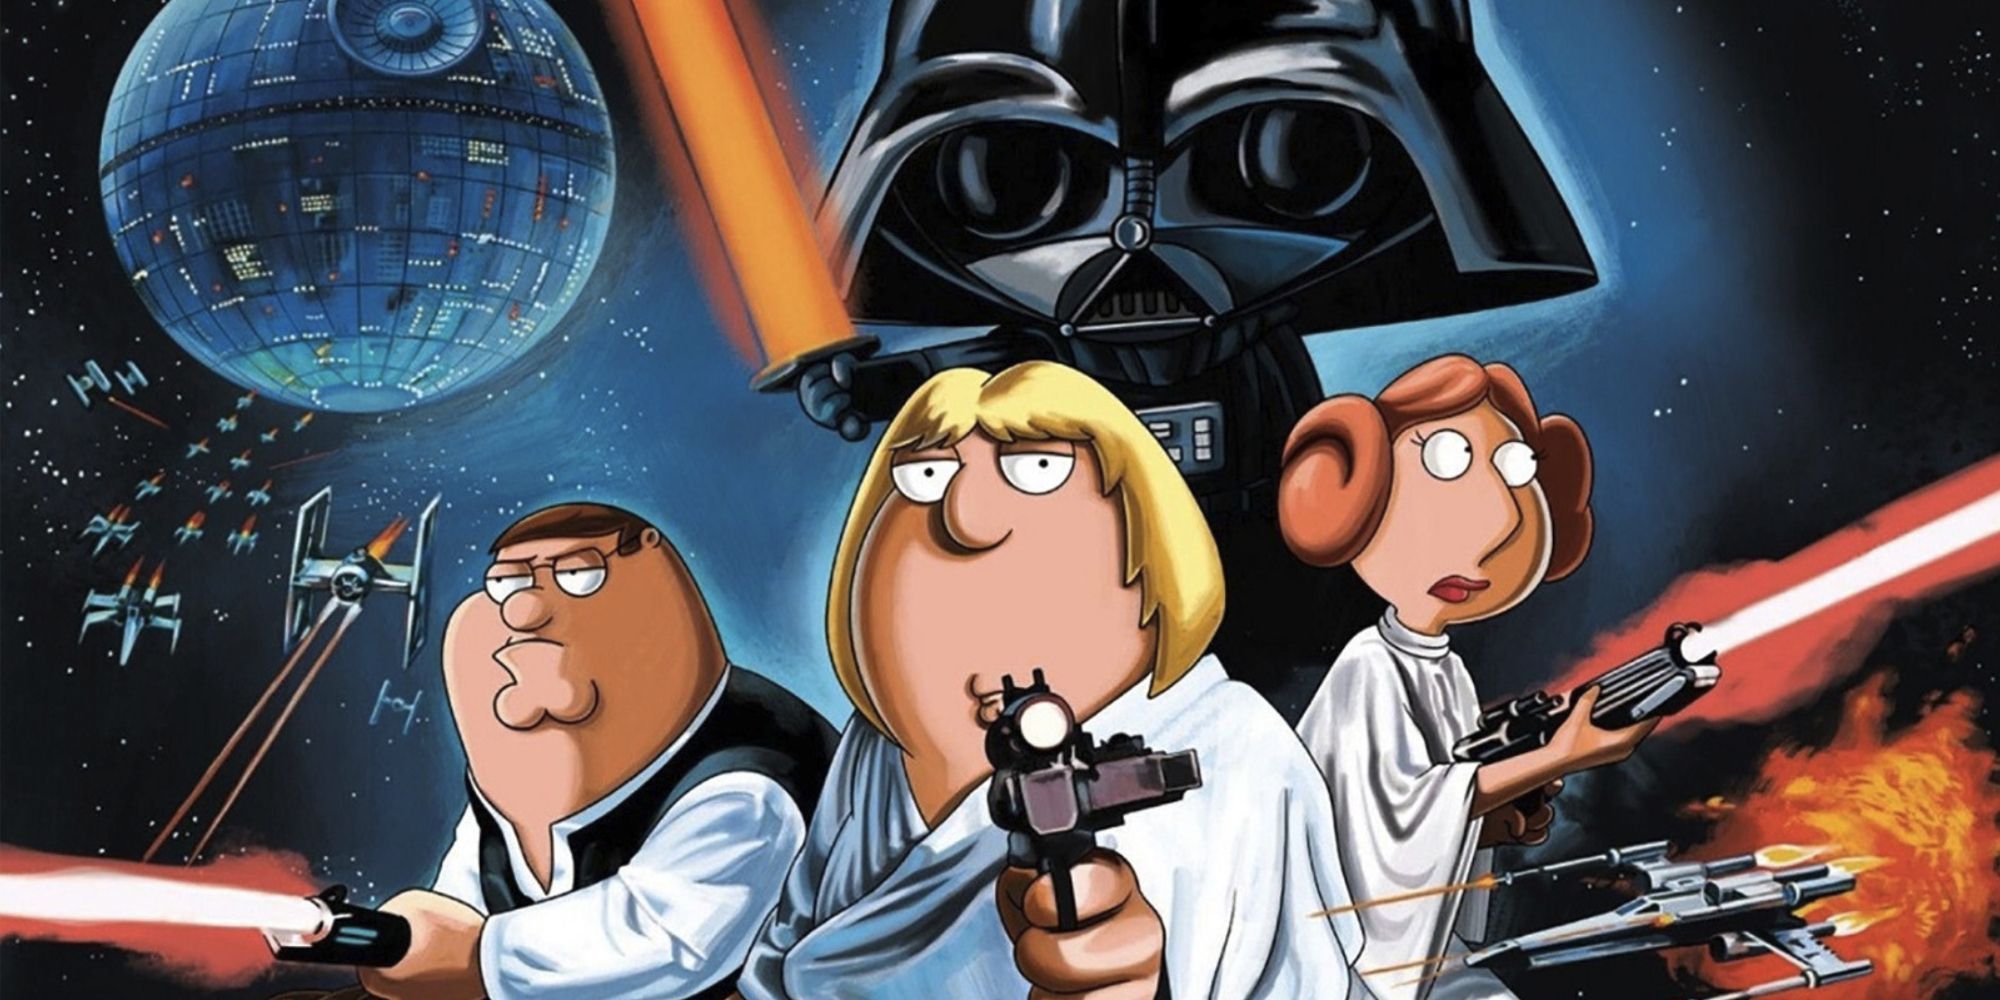 family-guy-star-wars-feature